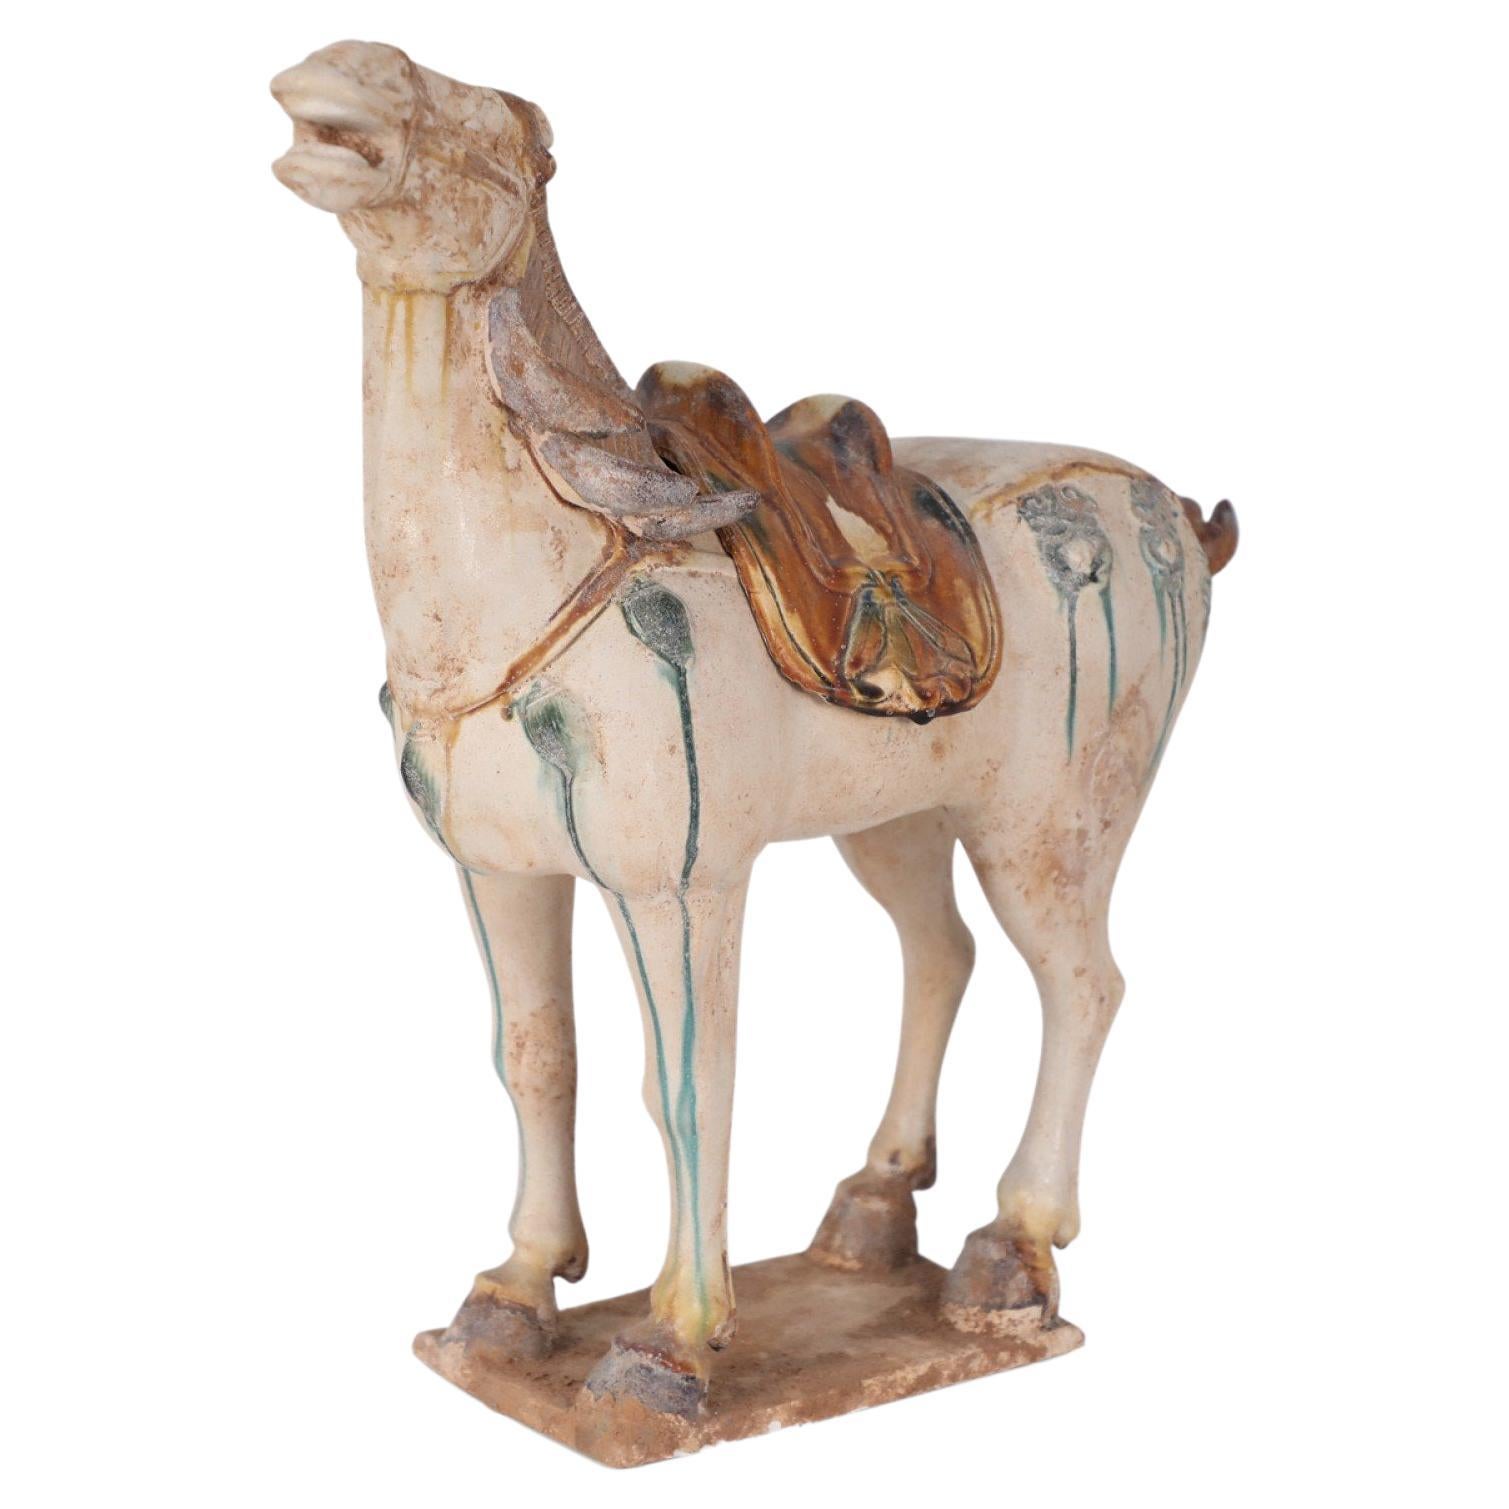 Chinese Sancai Glazed Tang Dynasty-Style Terra Cotta Horse Tomb Figure